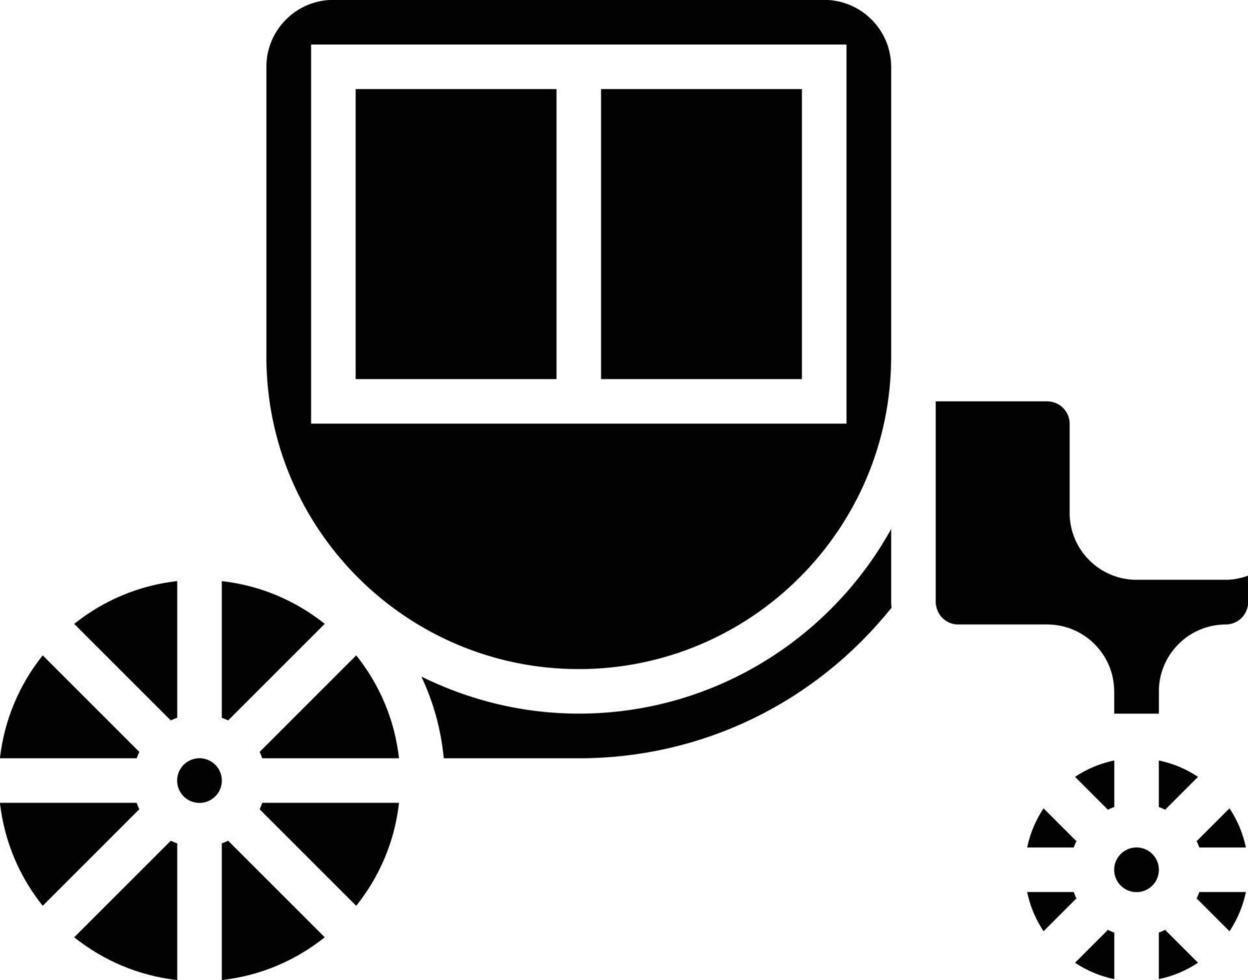 carriage cart transportation - solid icon vector